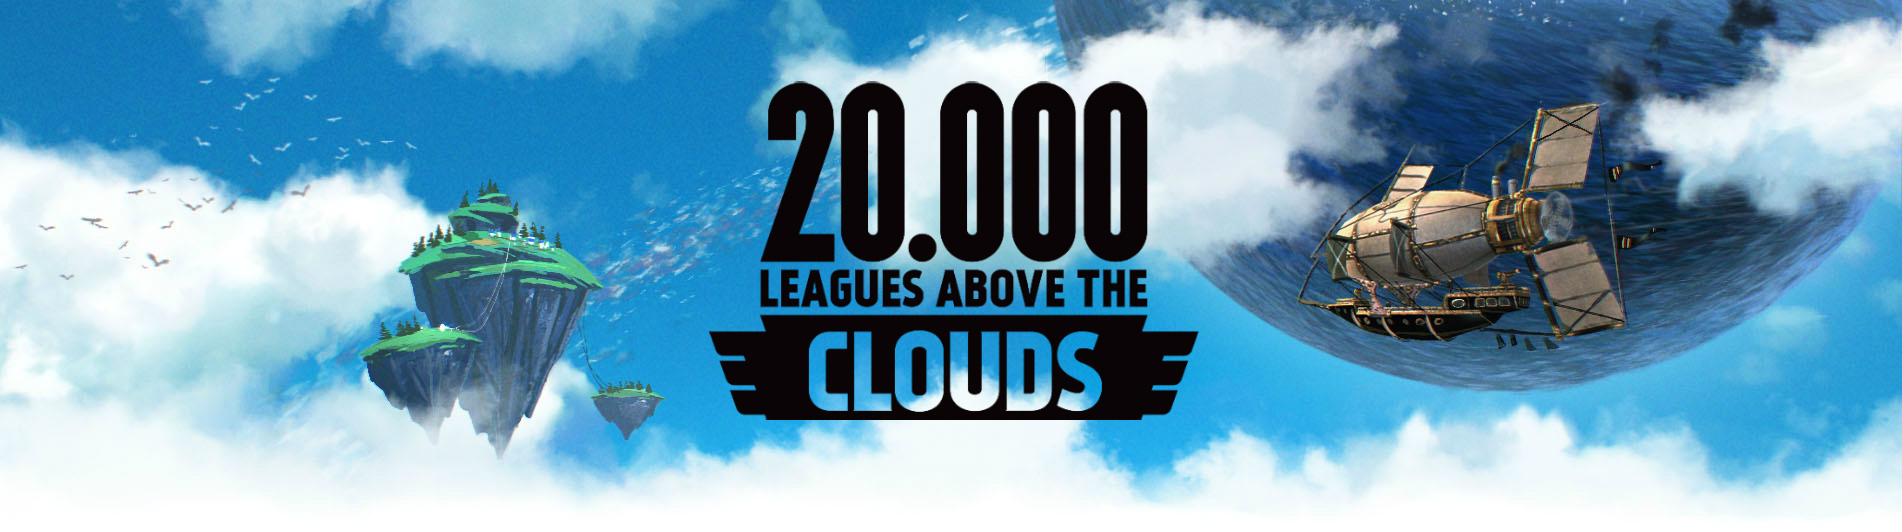 20,000 Leagues Above the Clouds